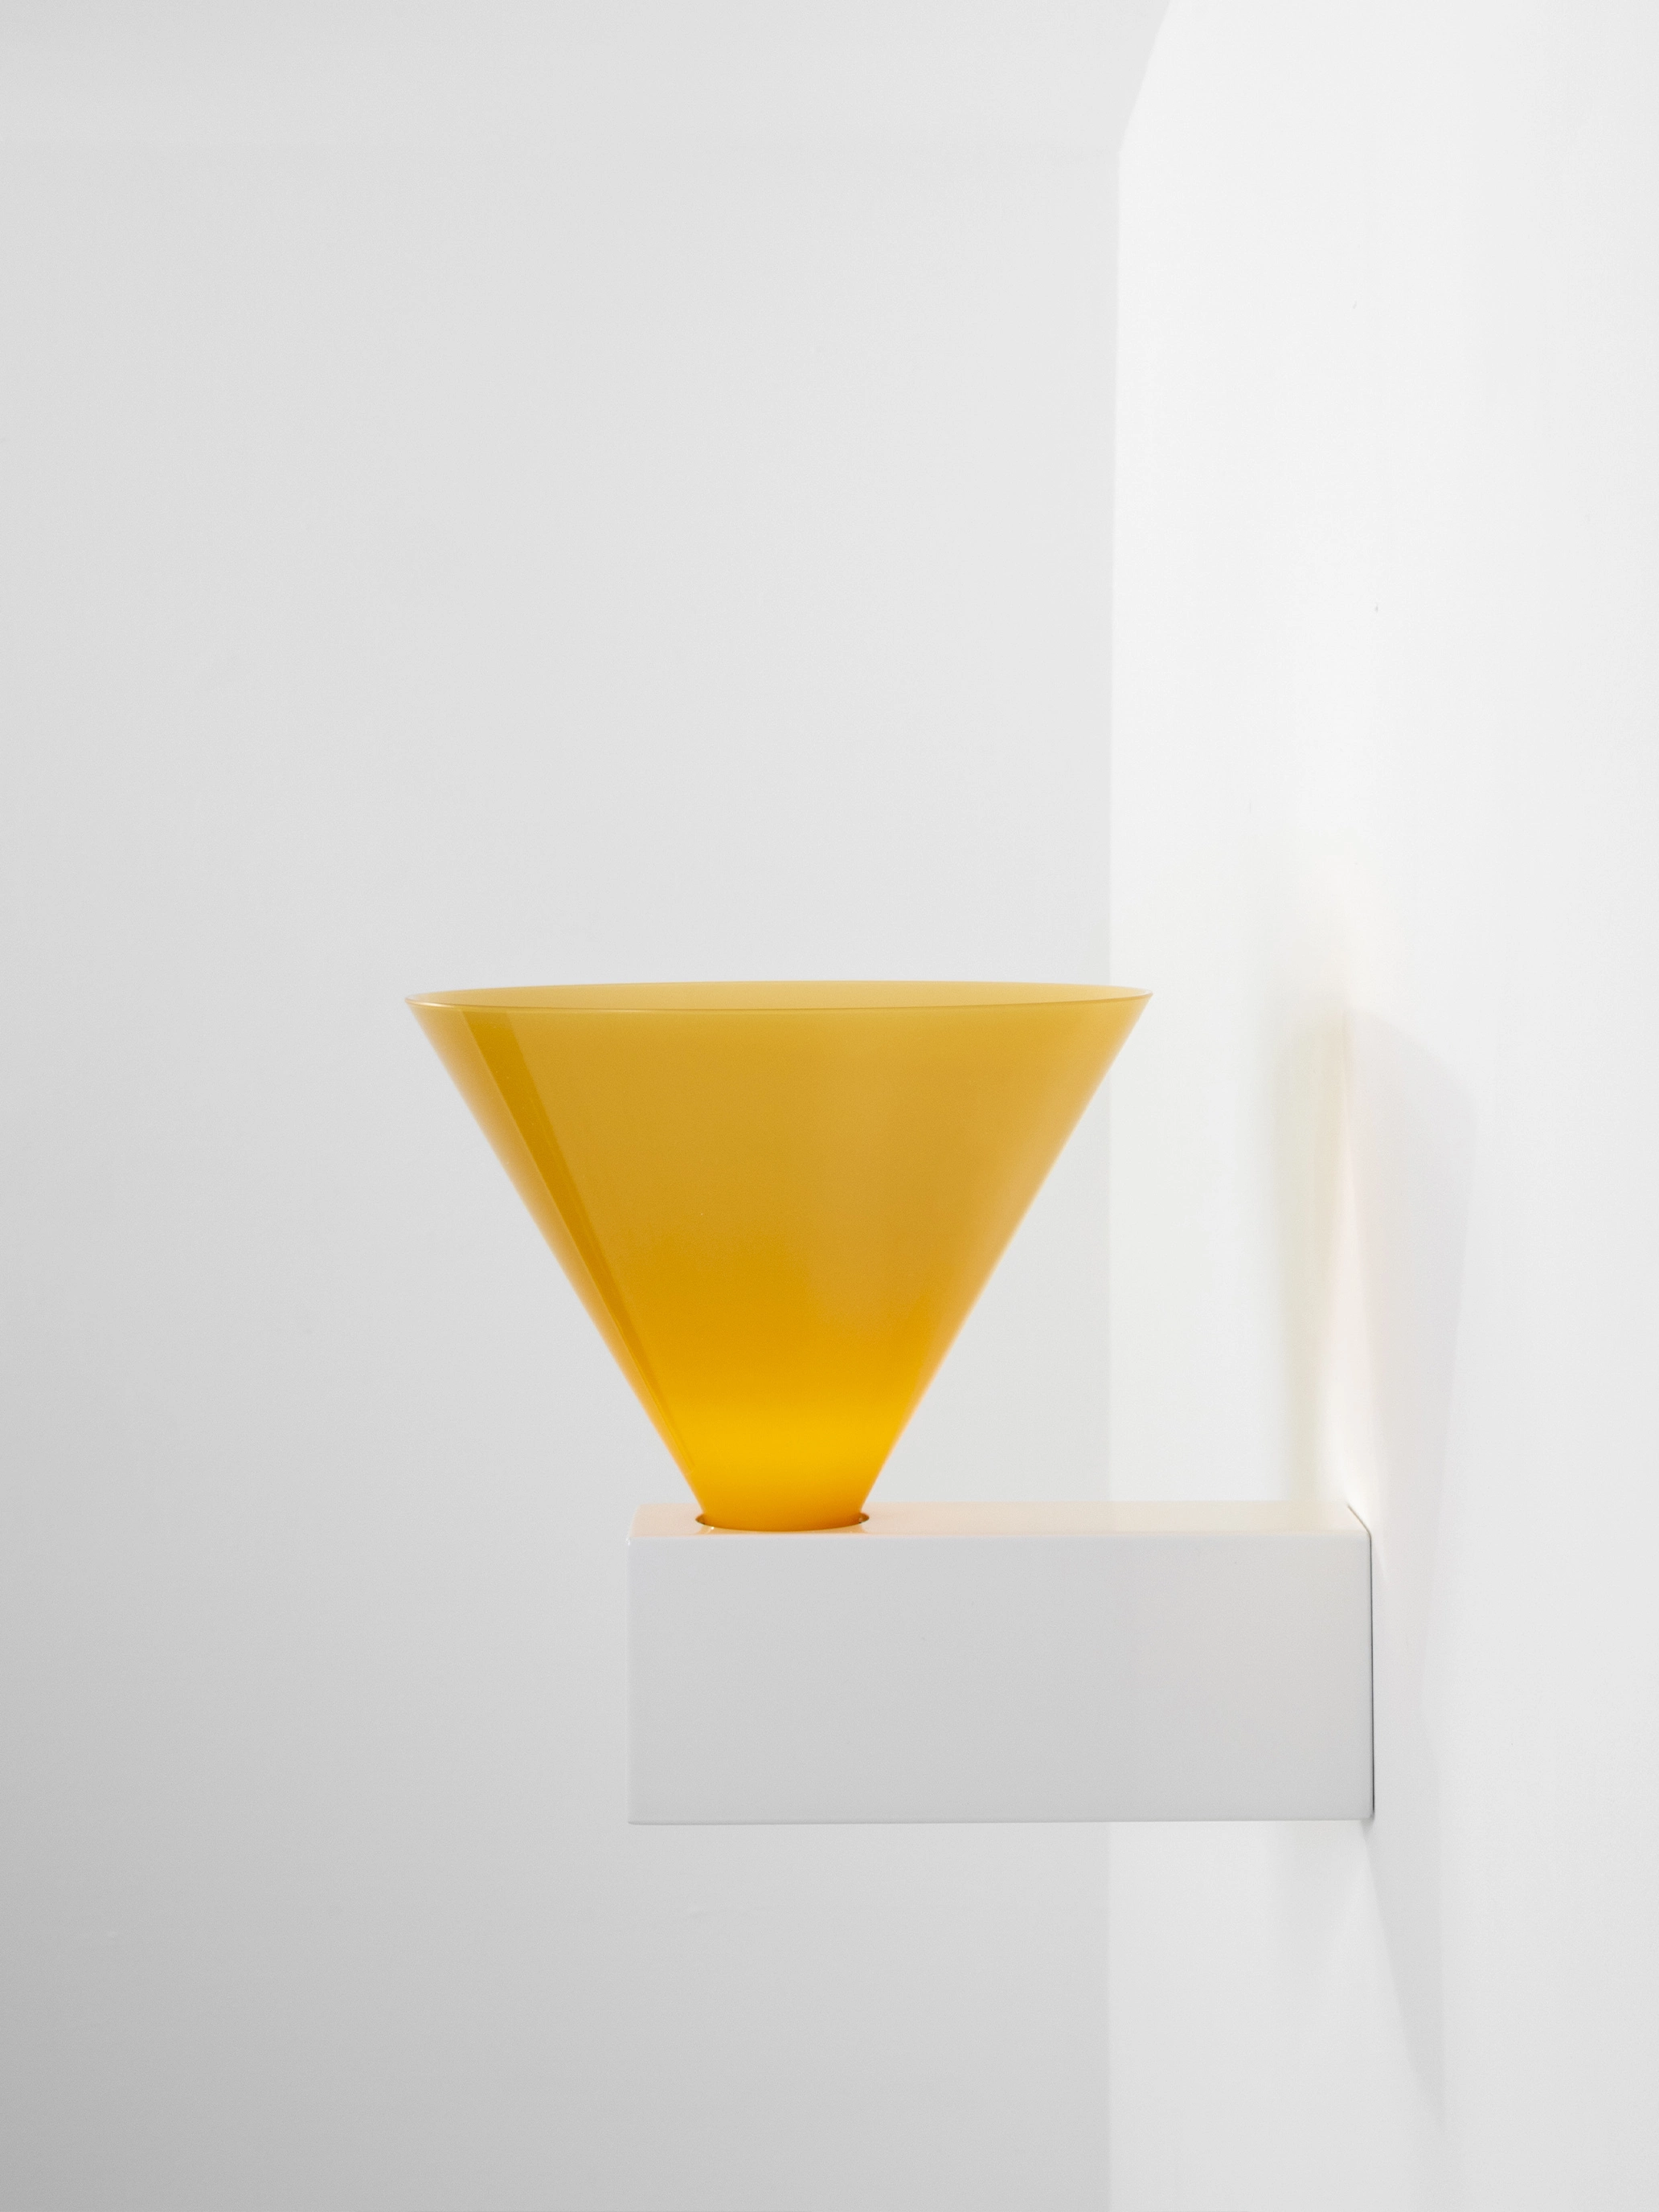 Signal W POLYCHROMATIC - Edward and Jay Barber and Osgerby - Wall light - Galerie kreo